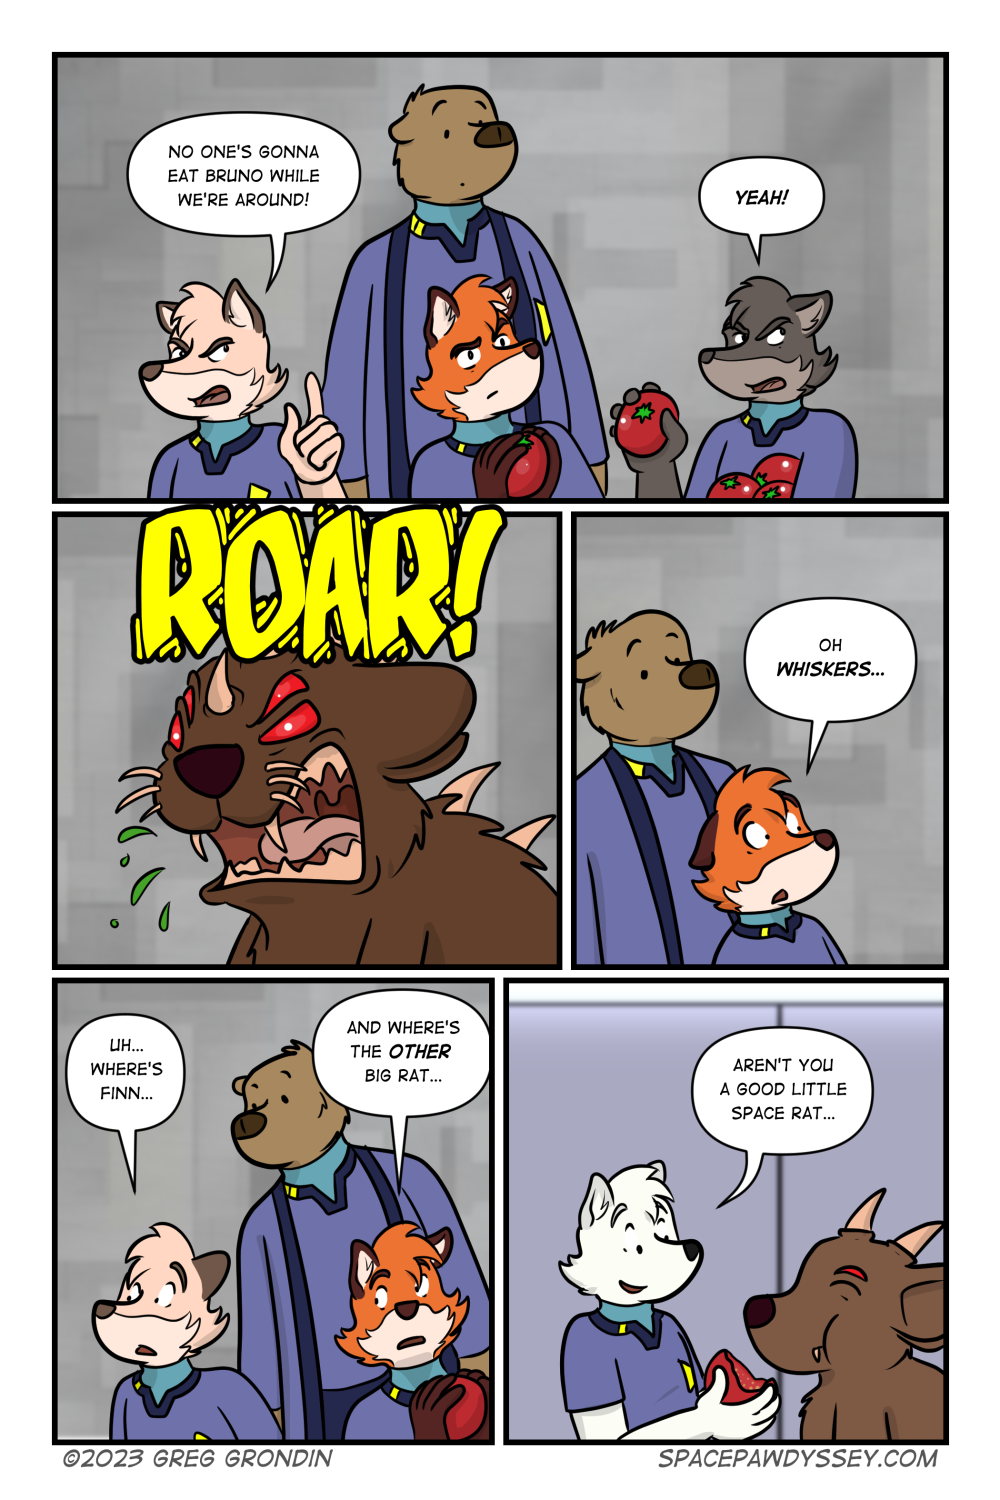 Space Pawdyssey #621